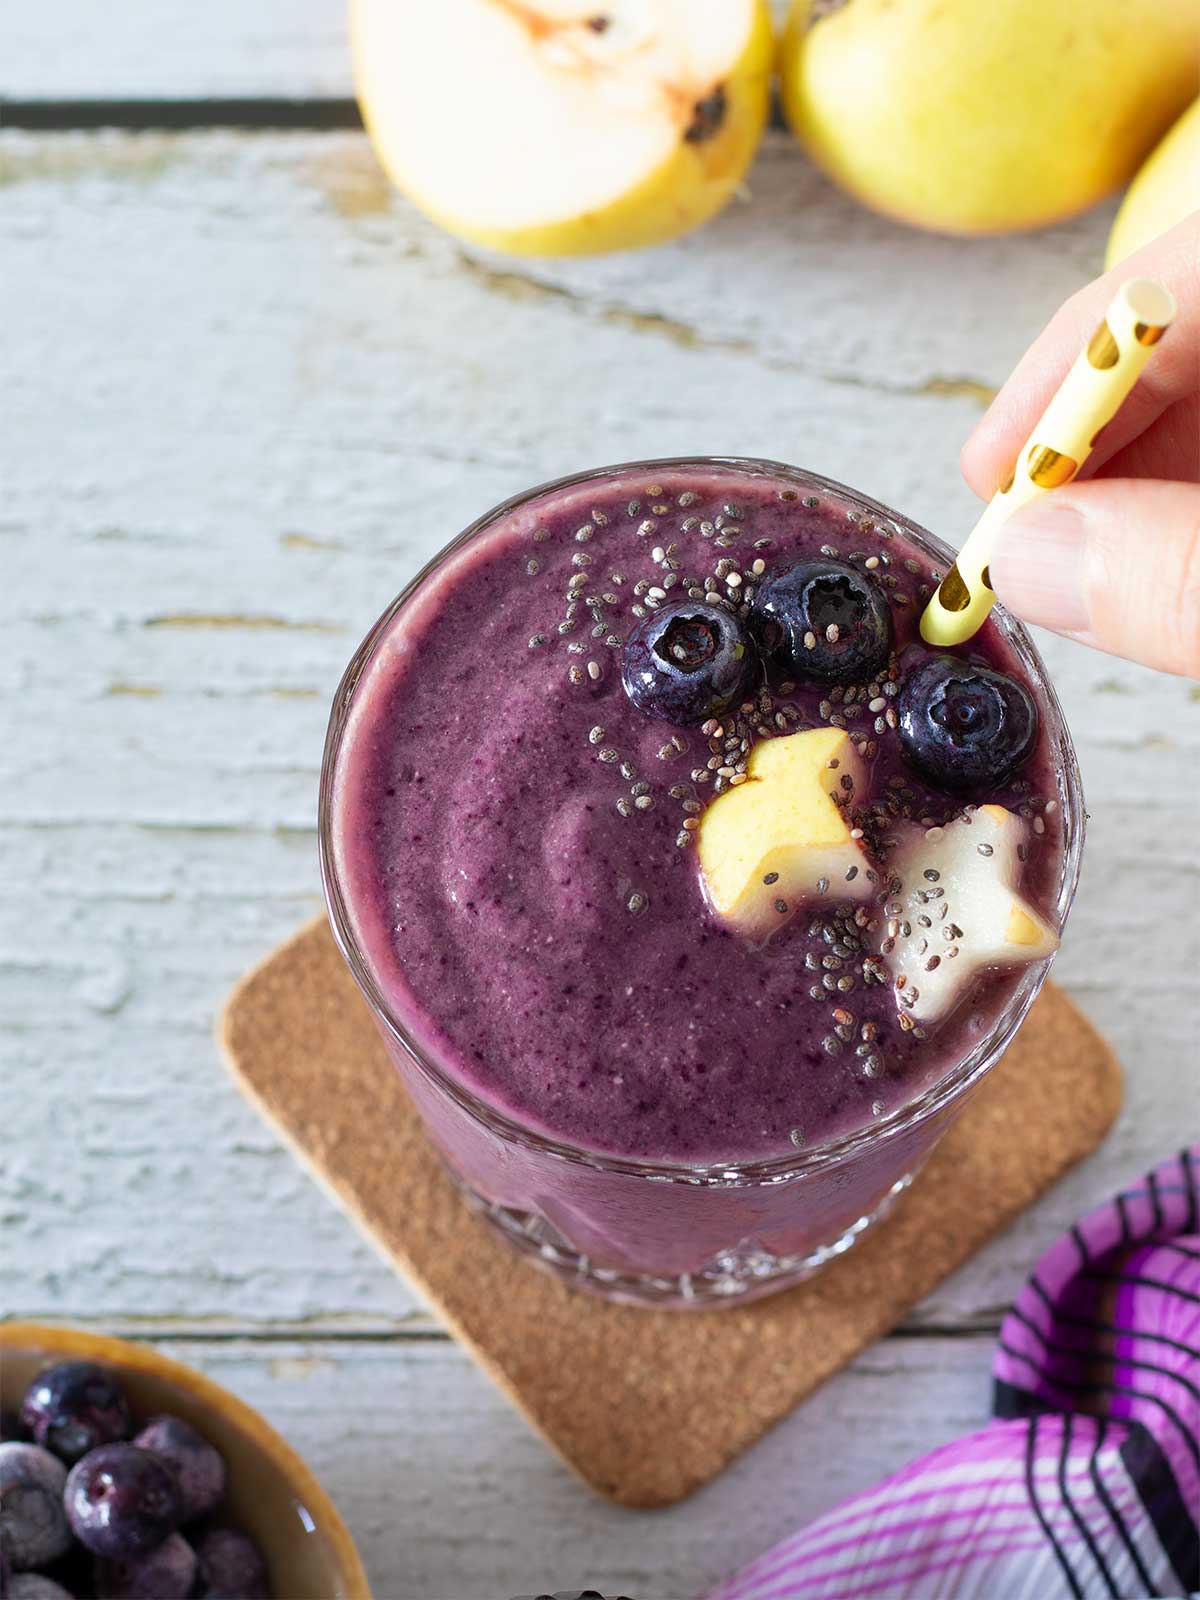 Banana-free pear blueberry smoothie for metabolism boosting and weight loss.